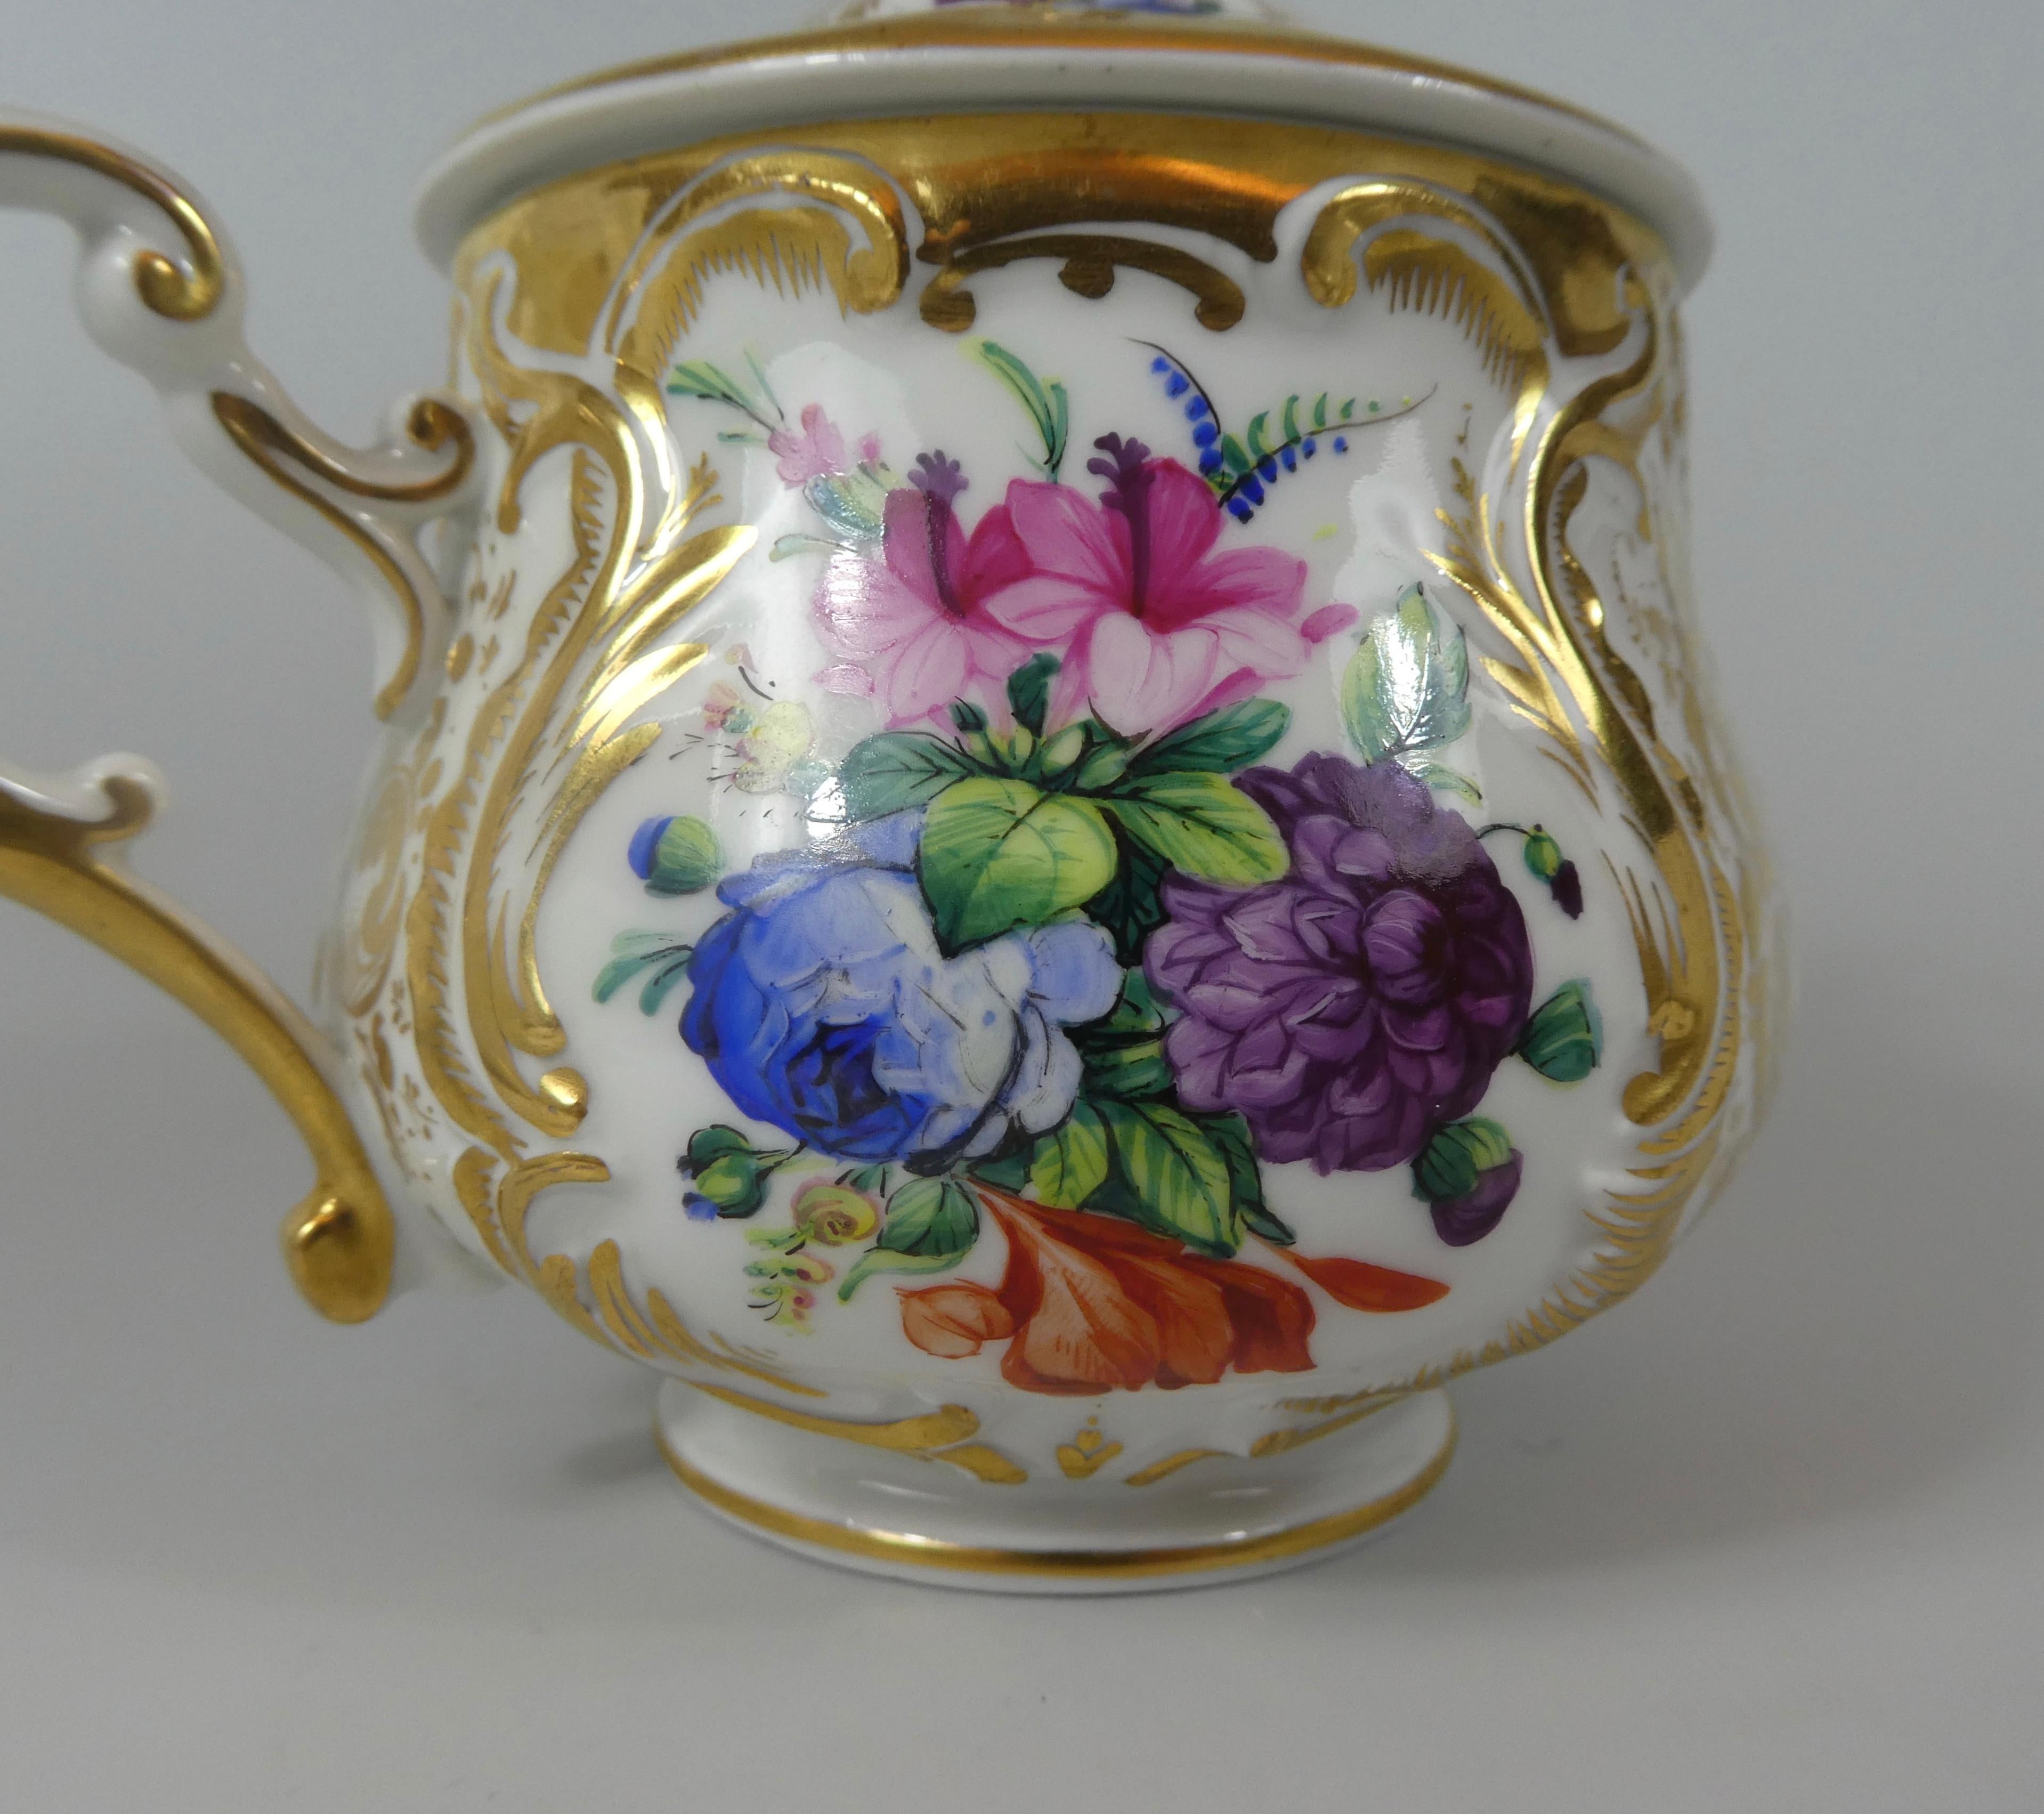 KPM Berlin Porcelain Chocolate Cup, Cover and Stand, circa 1860 3